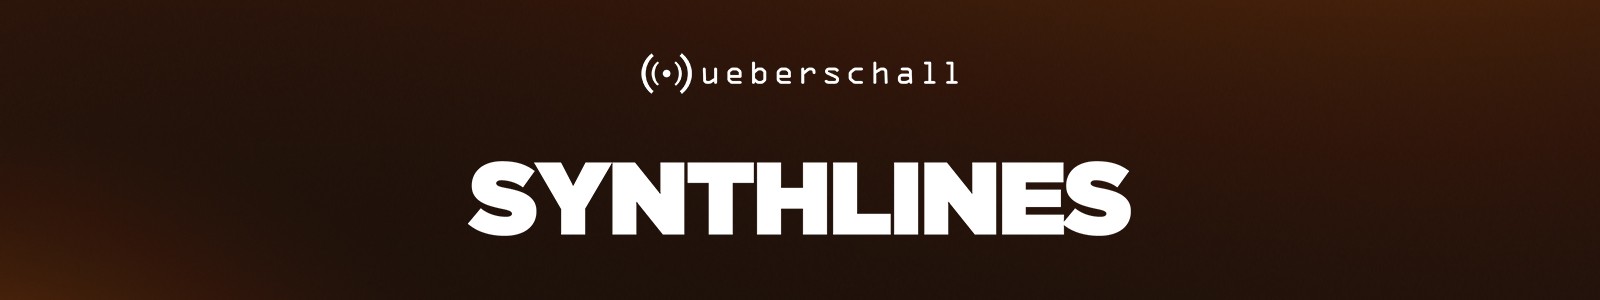 Synthlines by Ueberschall